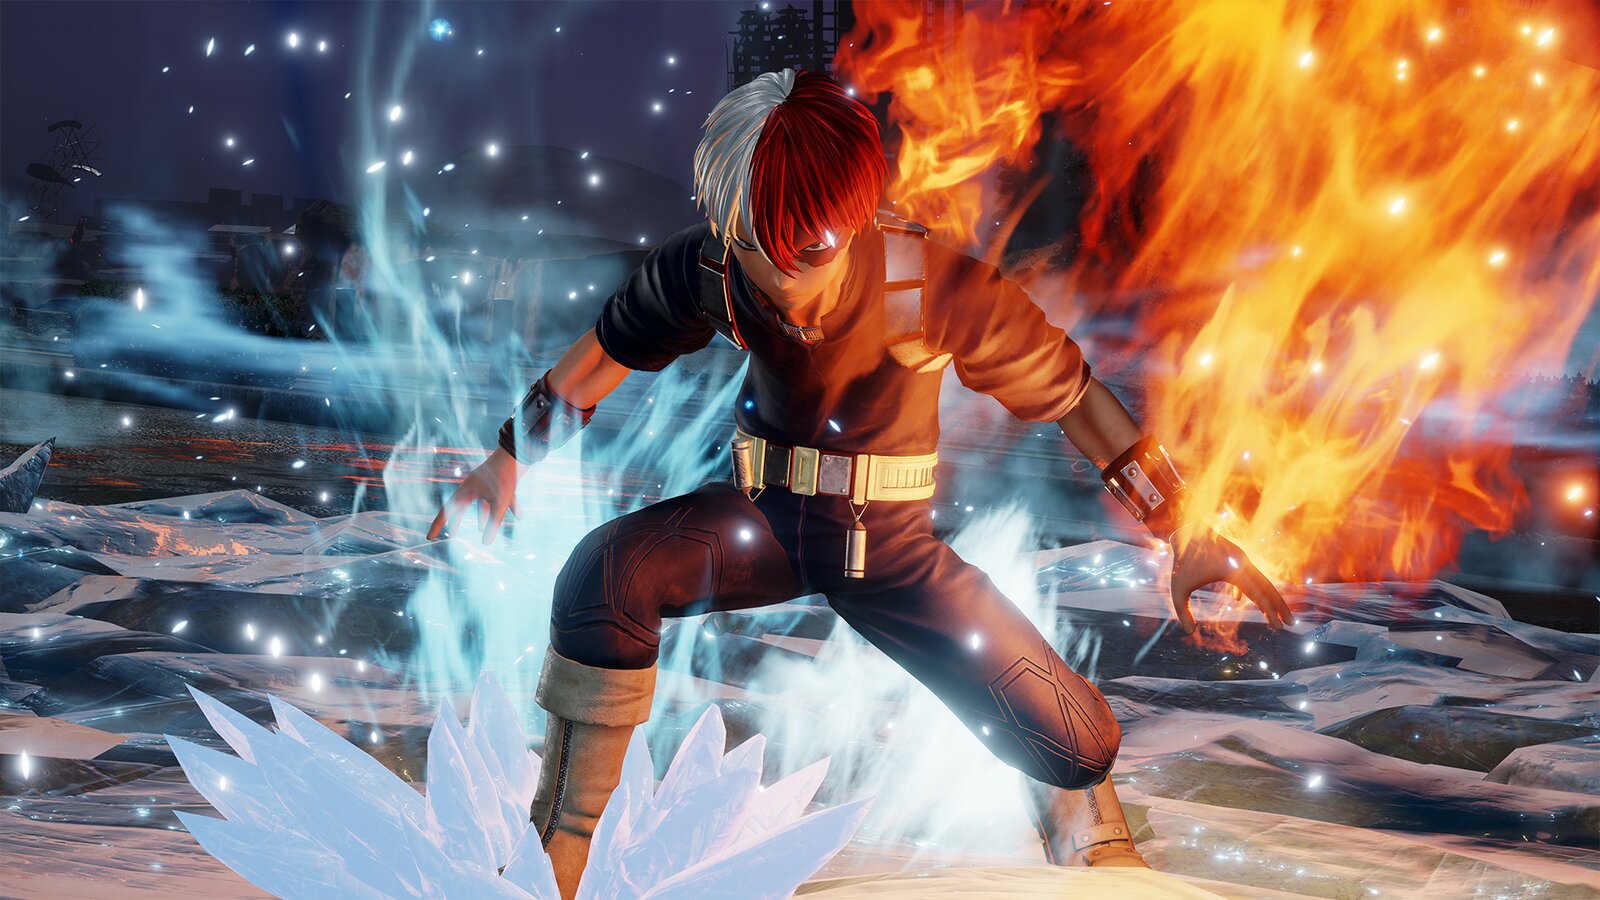 Jump Force – Characters Pass 2